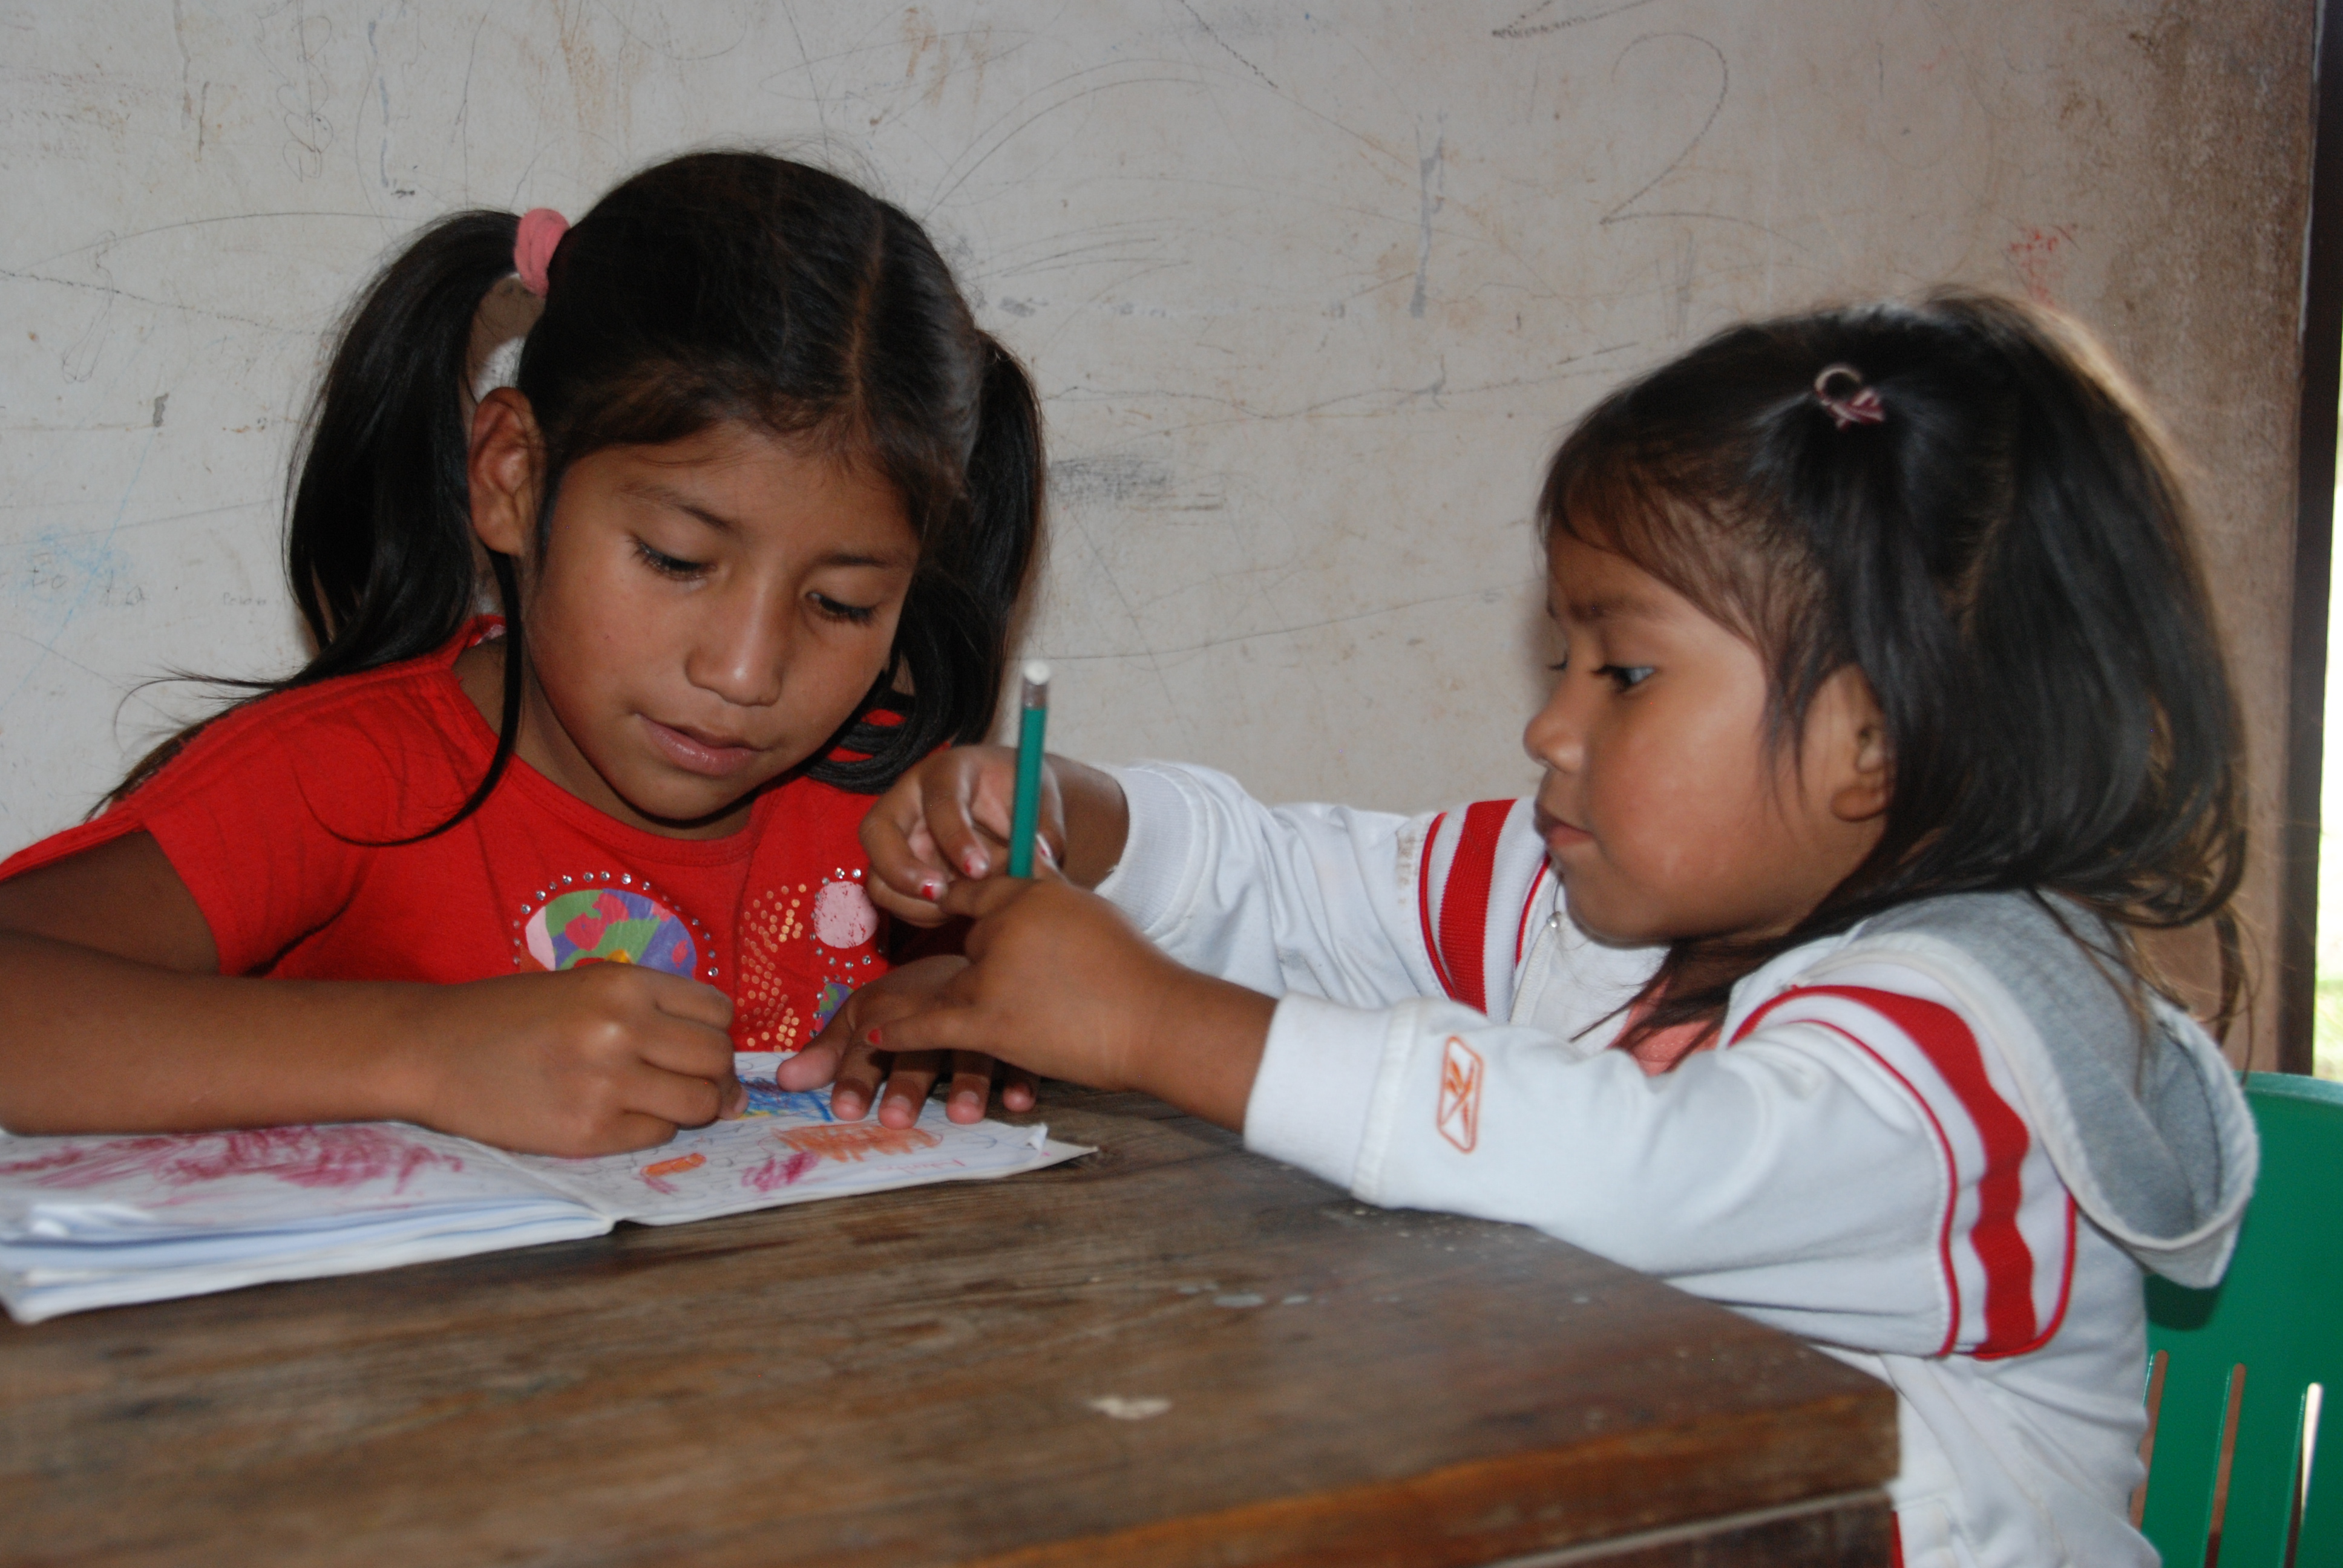 Child labour free zone empowers teachers in Nicaragua